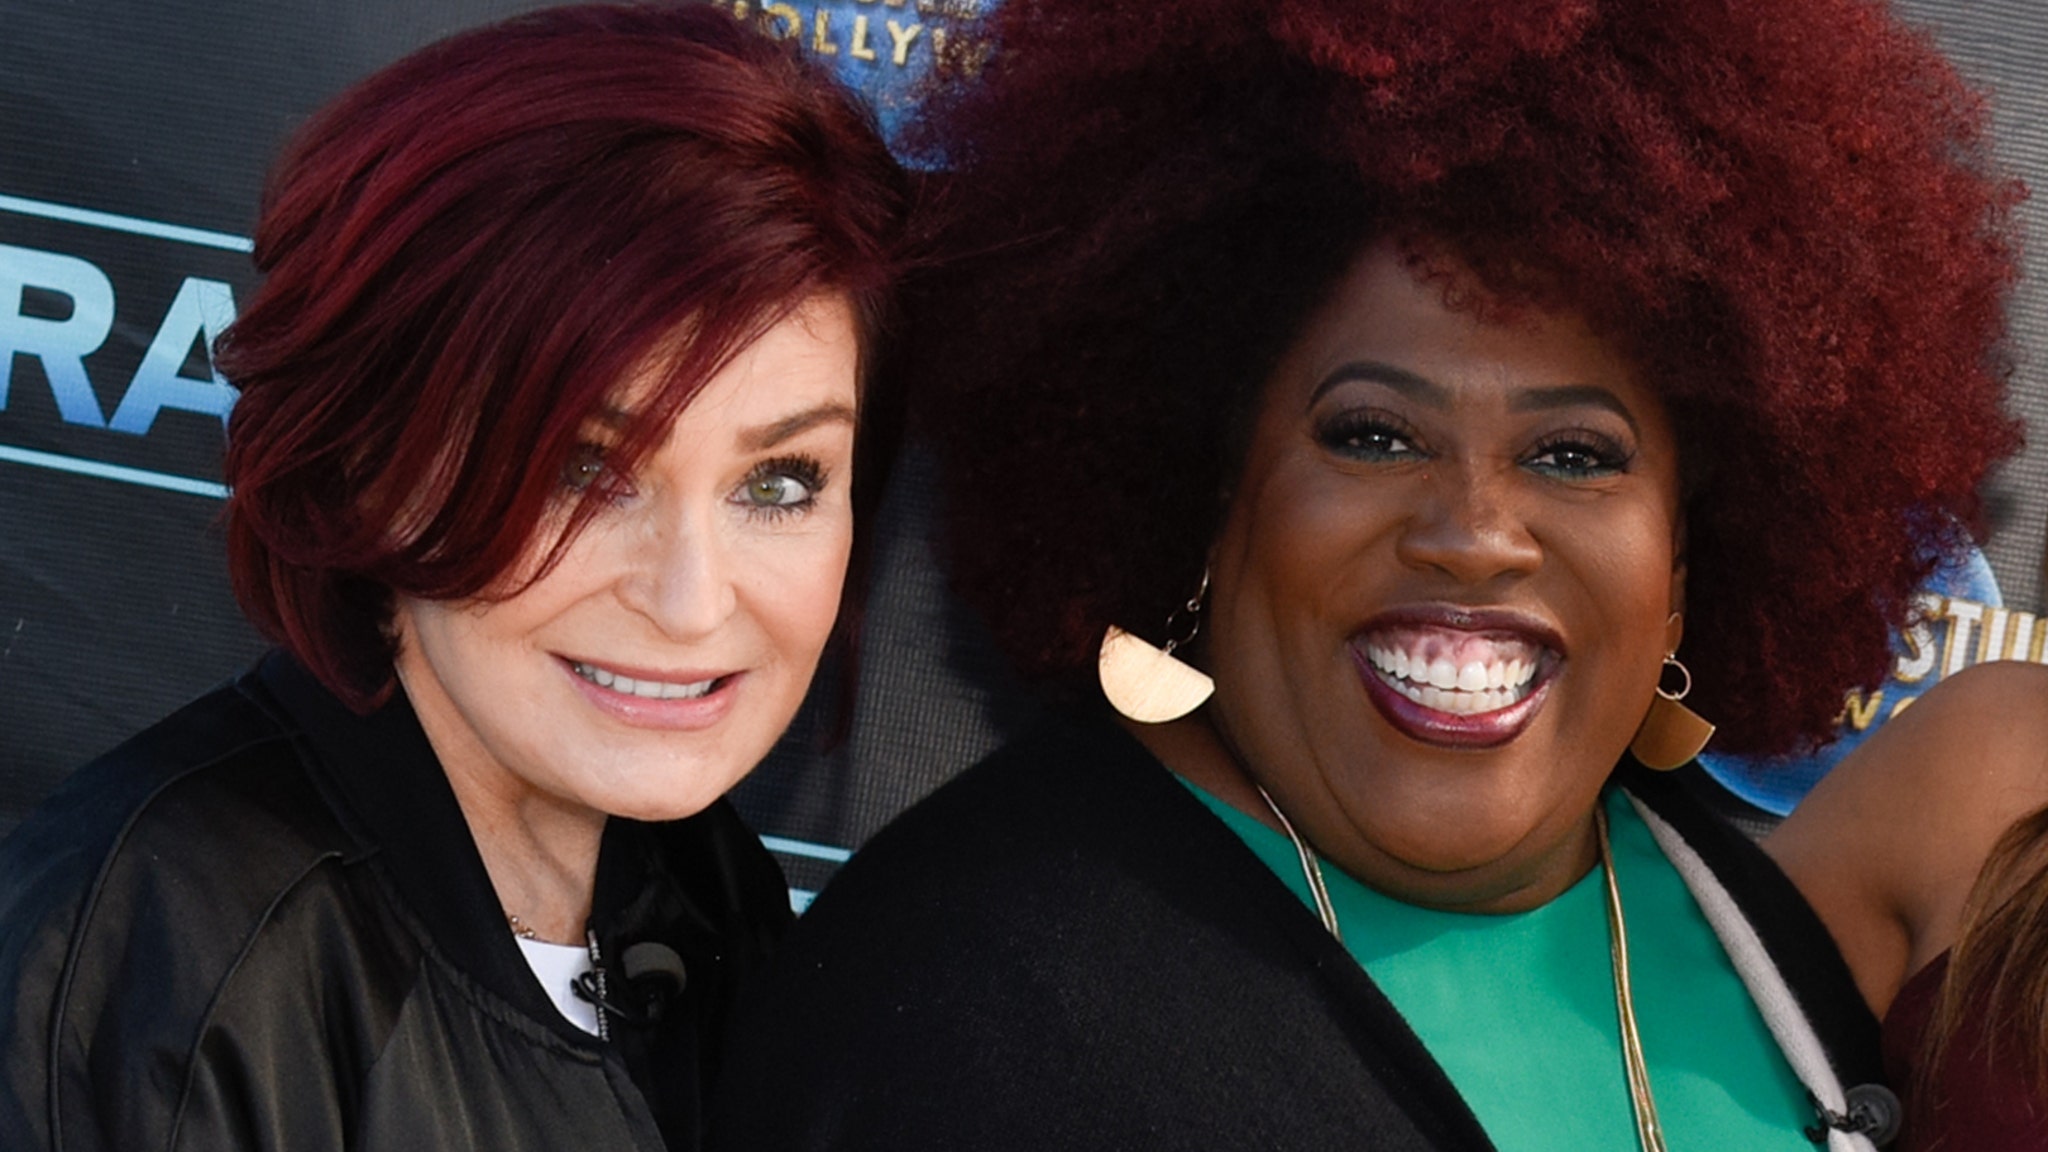 Sharon Osbourne leaks lyrics after Sheryl Underwood said they have not been spoken to since the ‘fight’